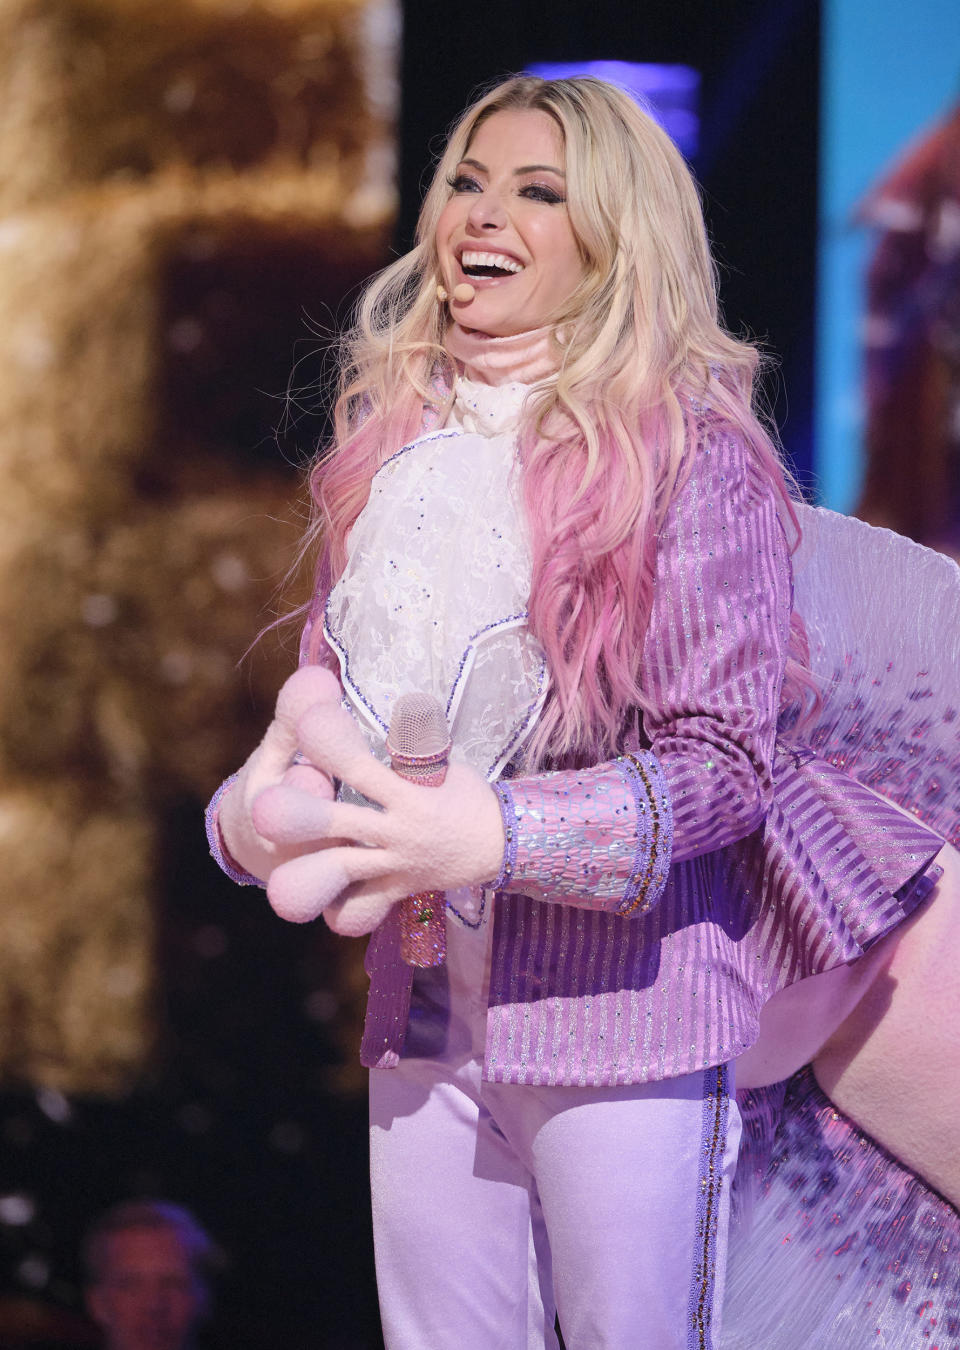 Alexa Bliss in the “80s Night” episode of The Masked Singer. (Michael Becker / FOX)